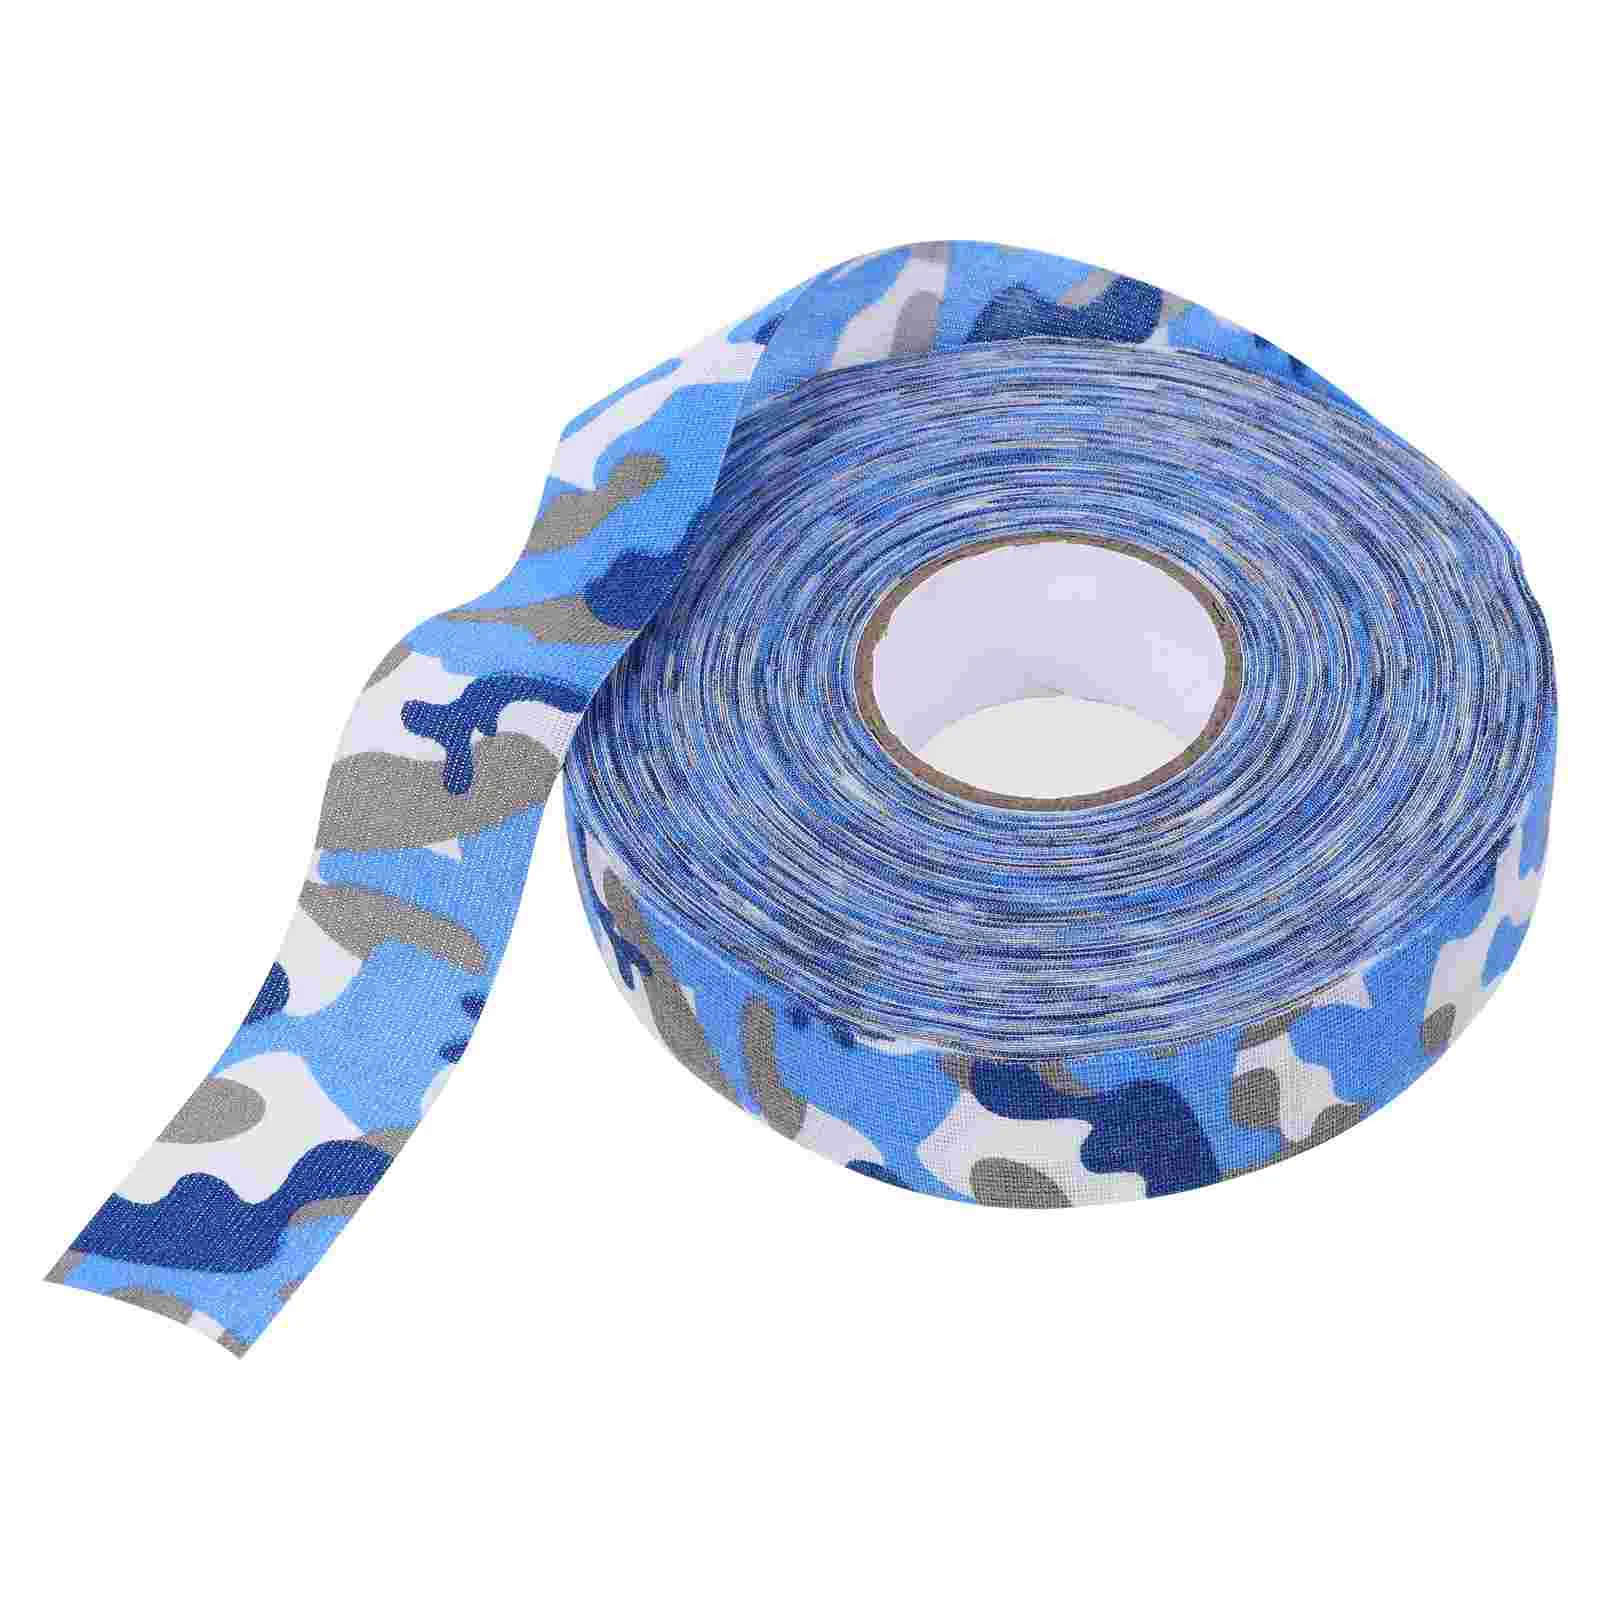 

2 5cmx25m Color Printed Sticky Tape Spots for Decorating Hockey Athletic Major PVC Wrapper Camouflage